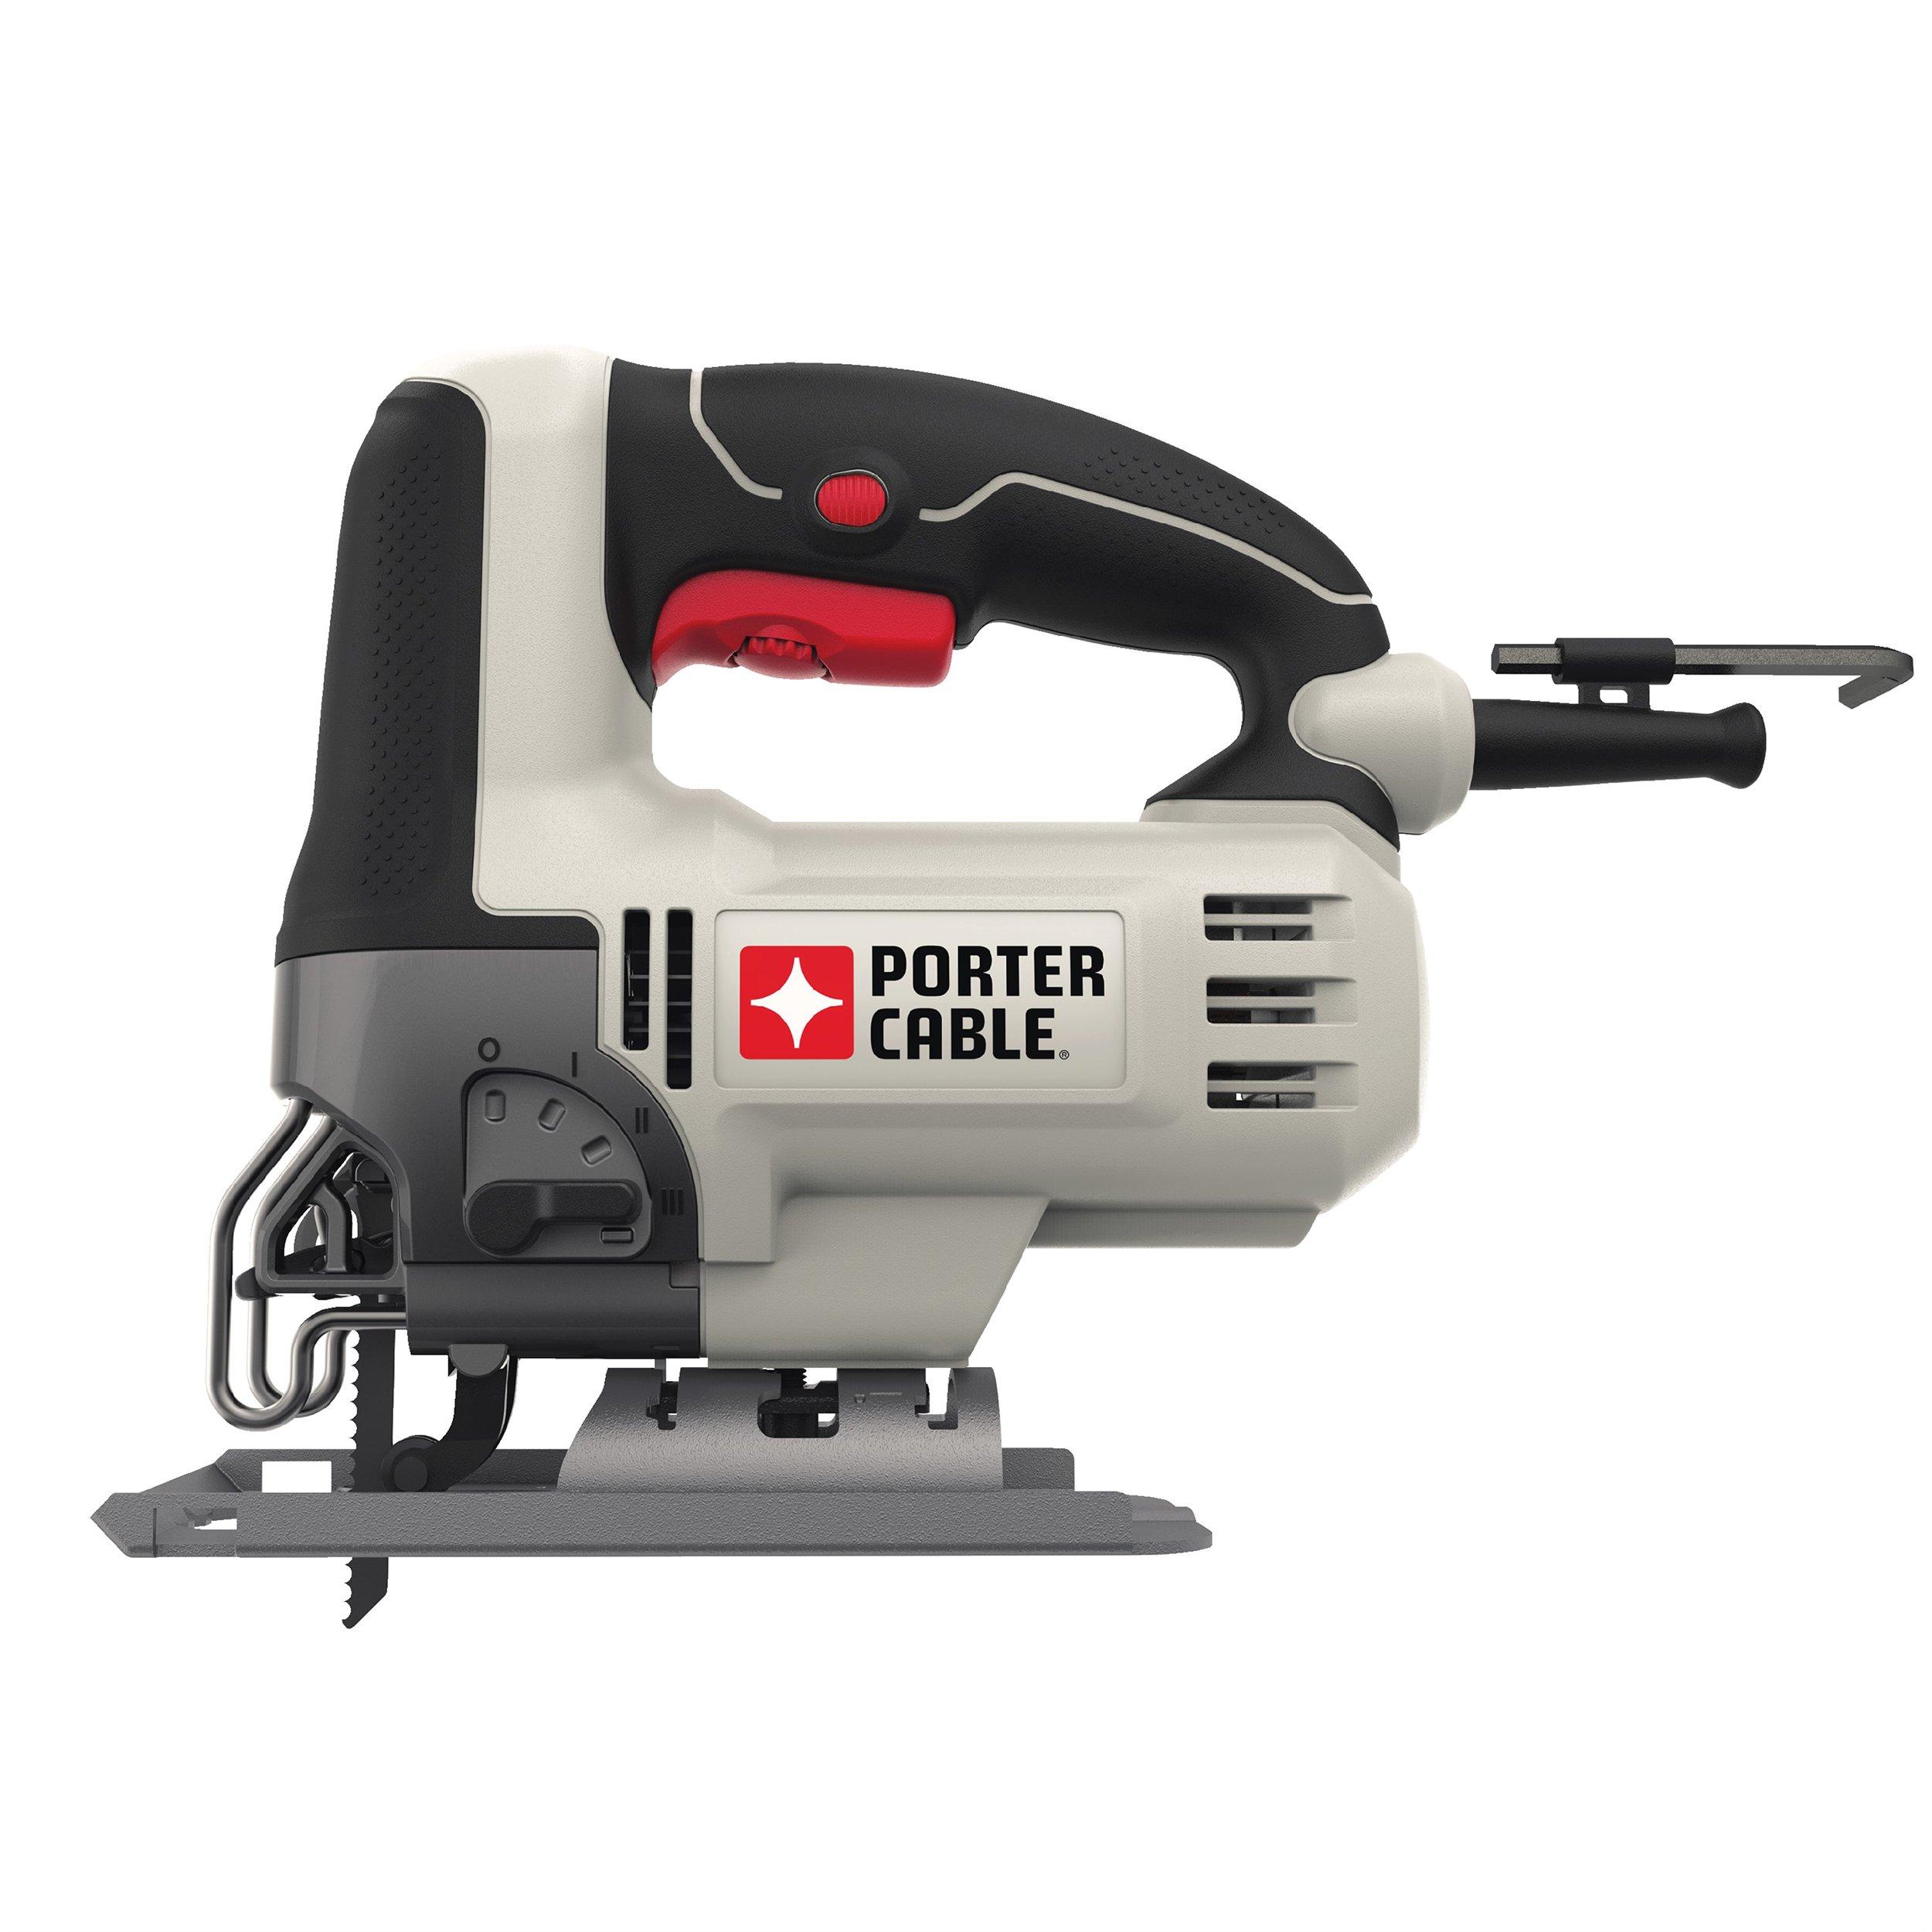 Porter Cable 6-Amp Corded Orbital Jig Saw